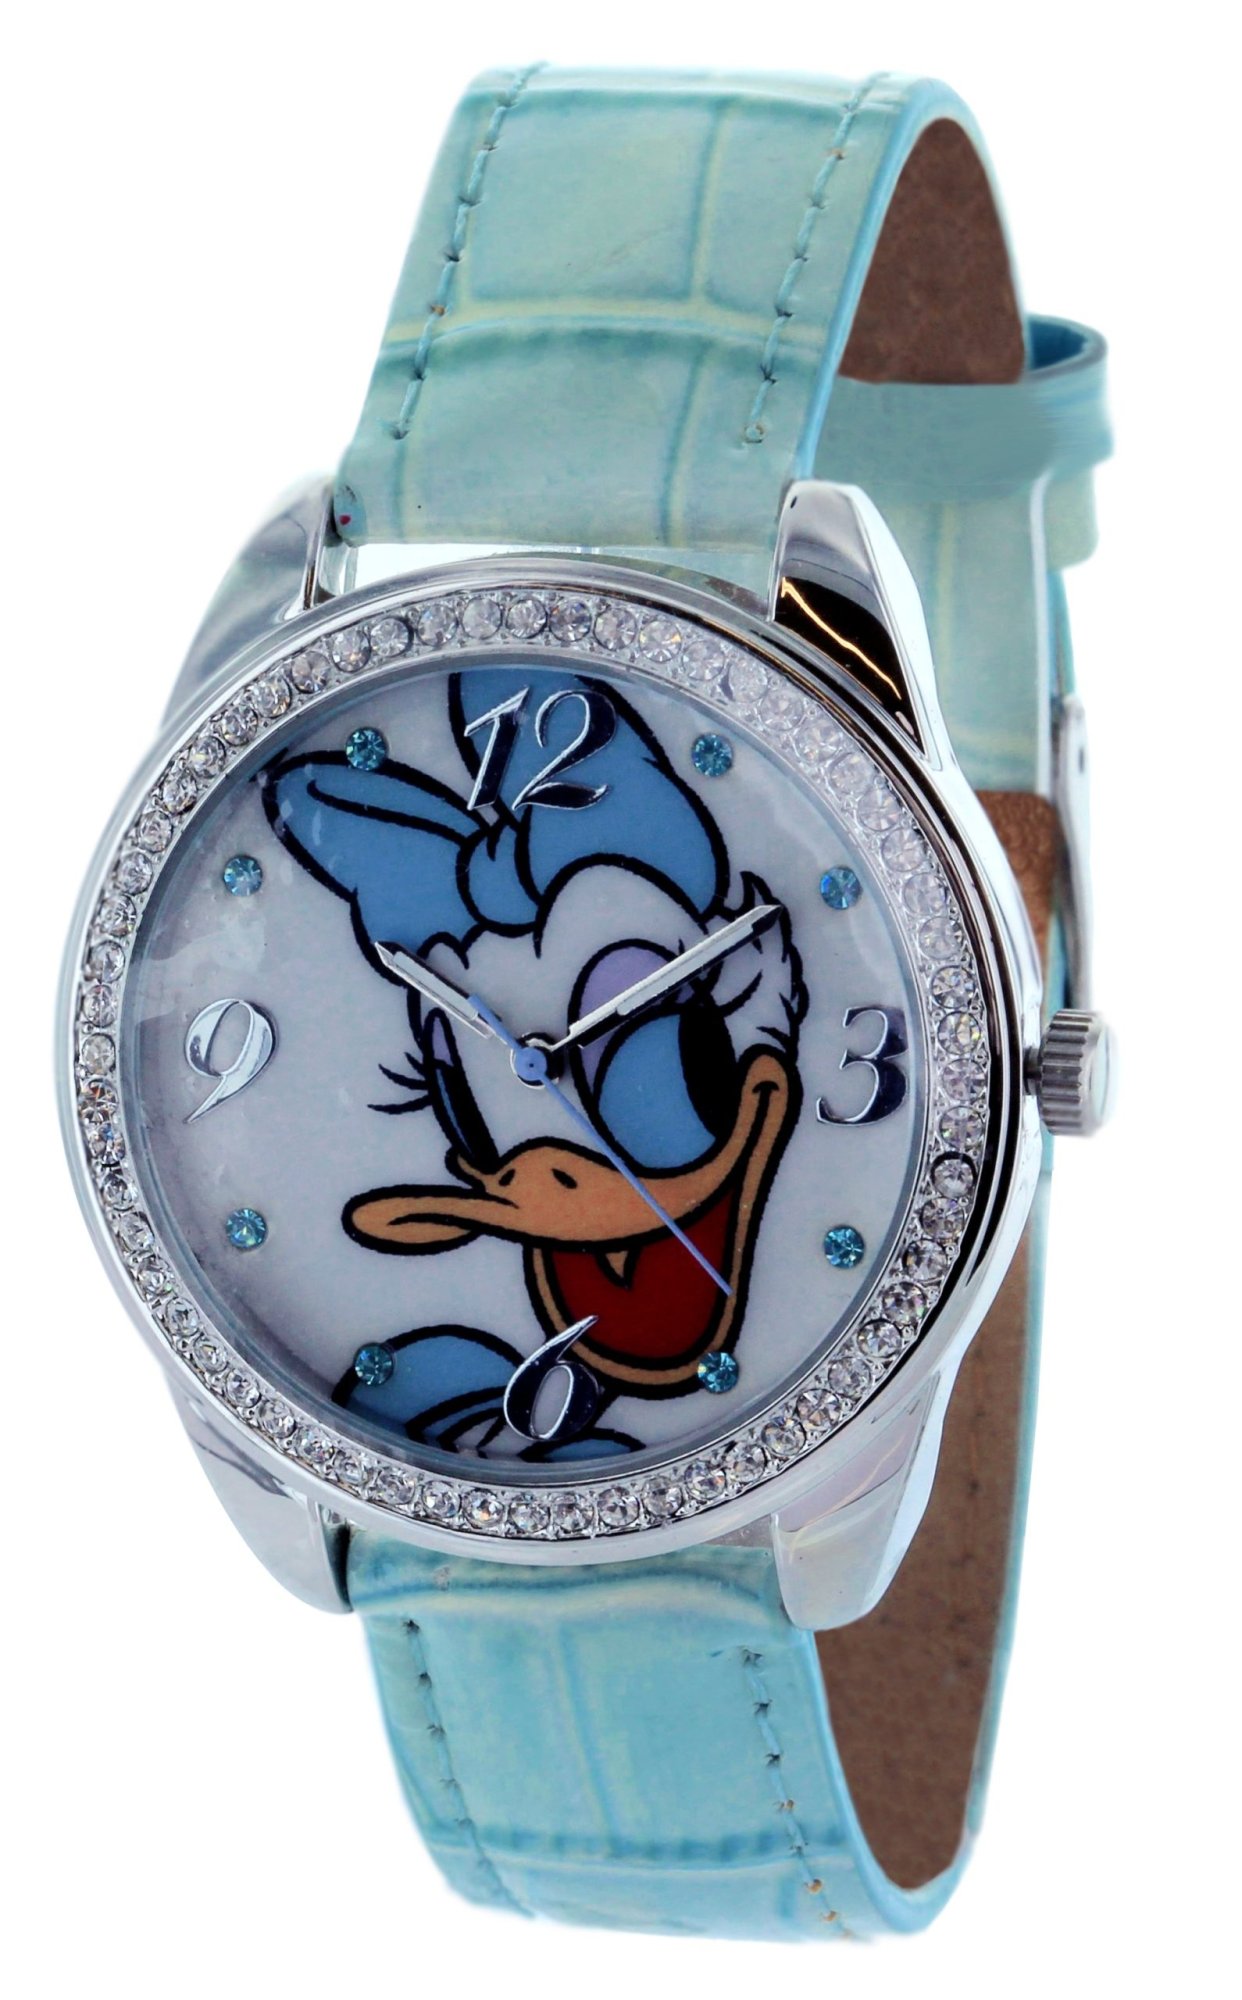 Model: Daisy Duck Watch With Stone Bezel and Genuine Leather Strap